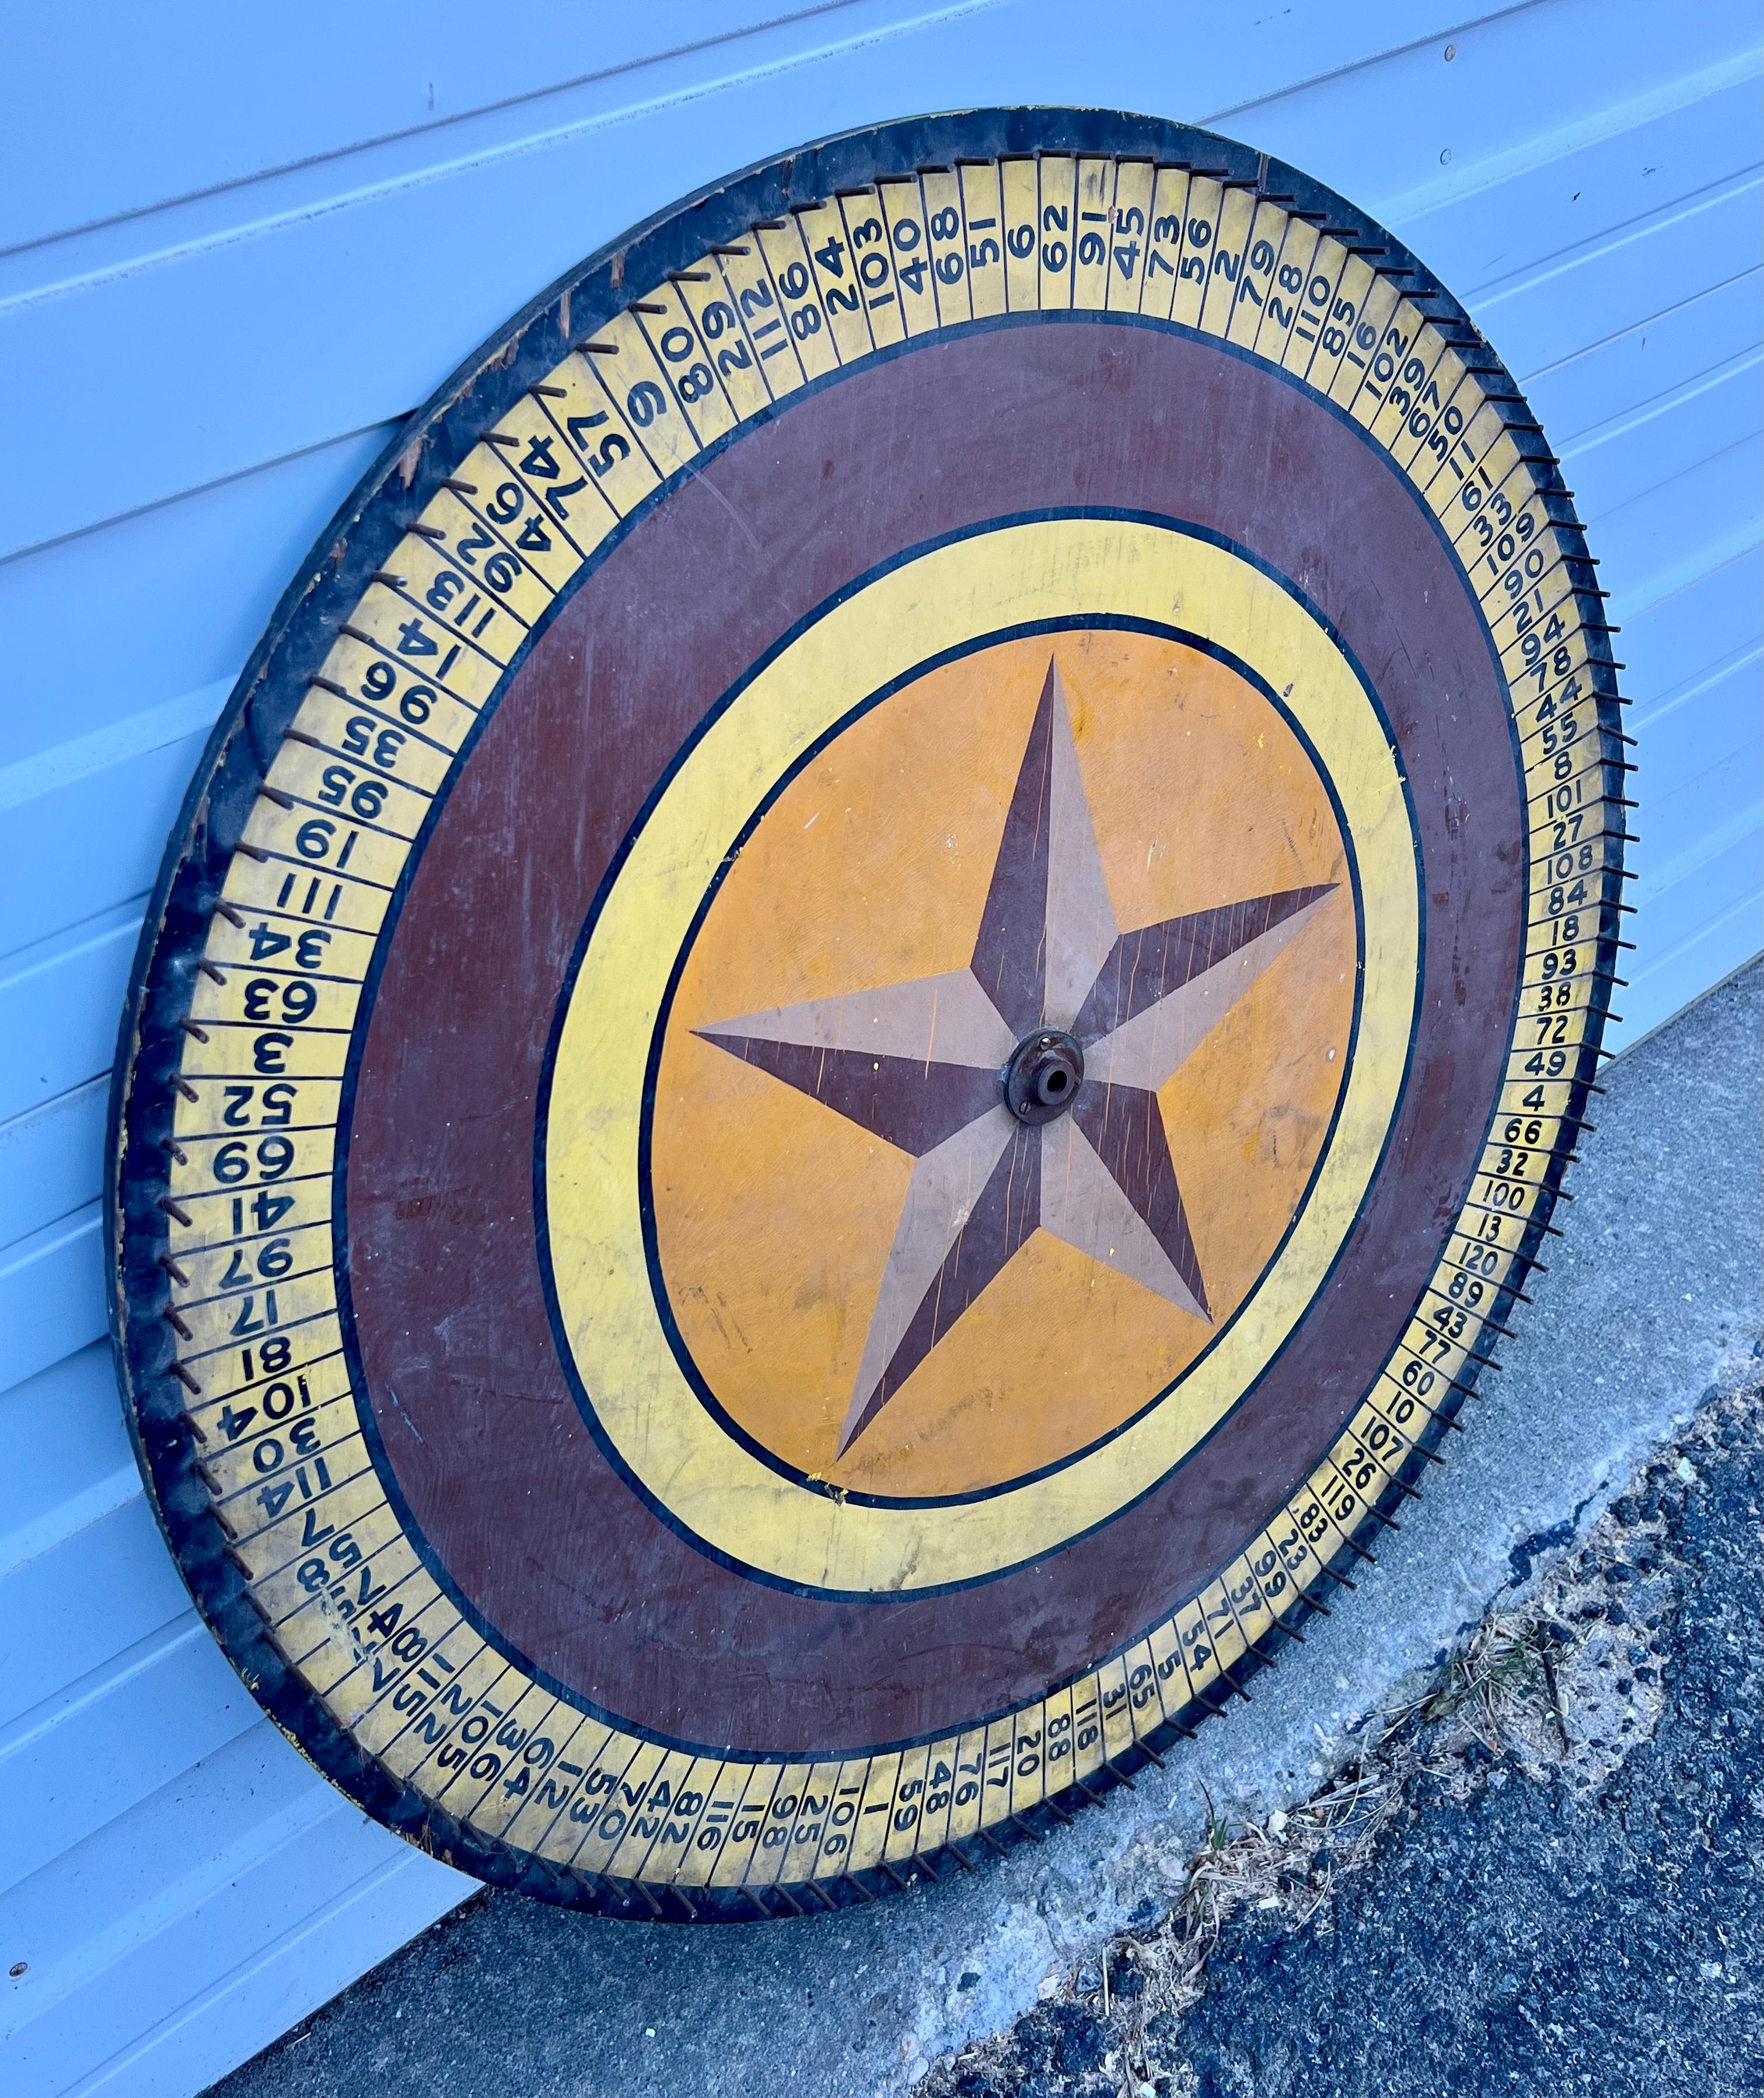 Large 19th century wooden gaming wheel with hand-painted face including numbers and central nautical star design.  In black, maroon, yellow, and orange paints, with metal dowels separating each number.  Fantastic wall hanging.